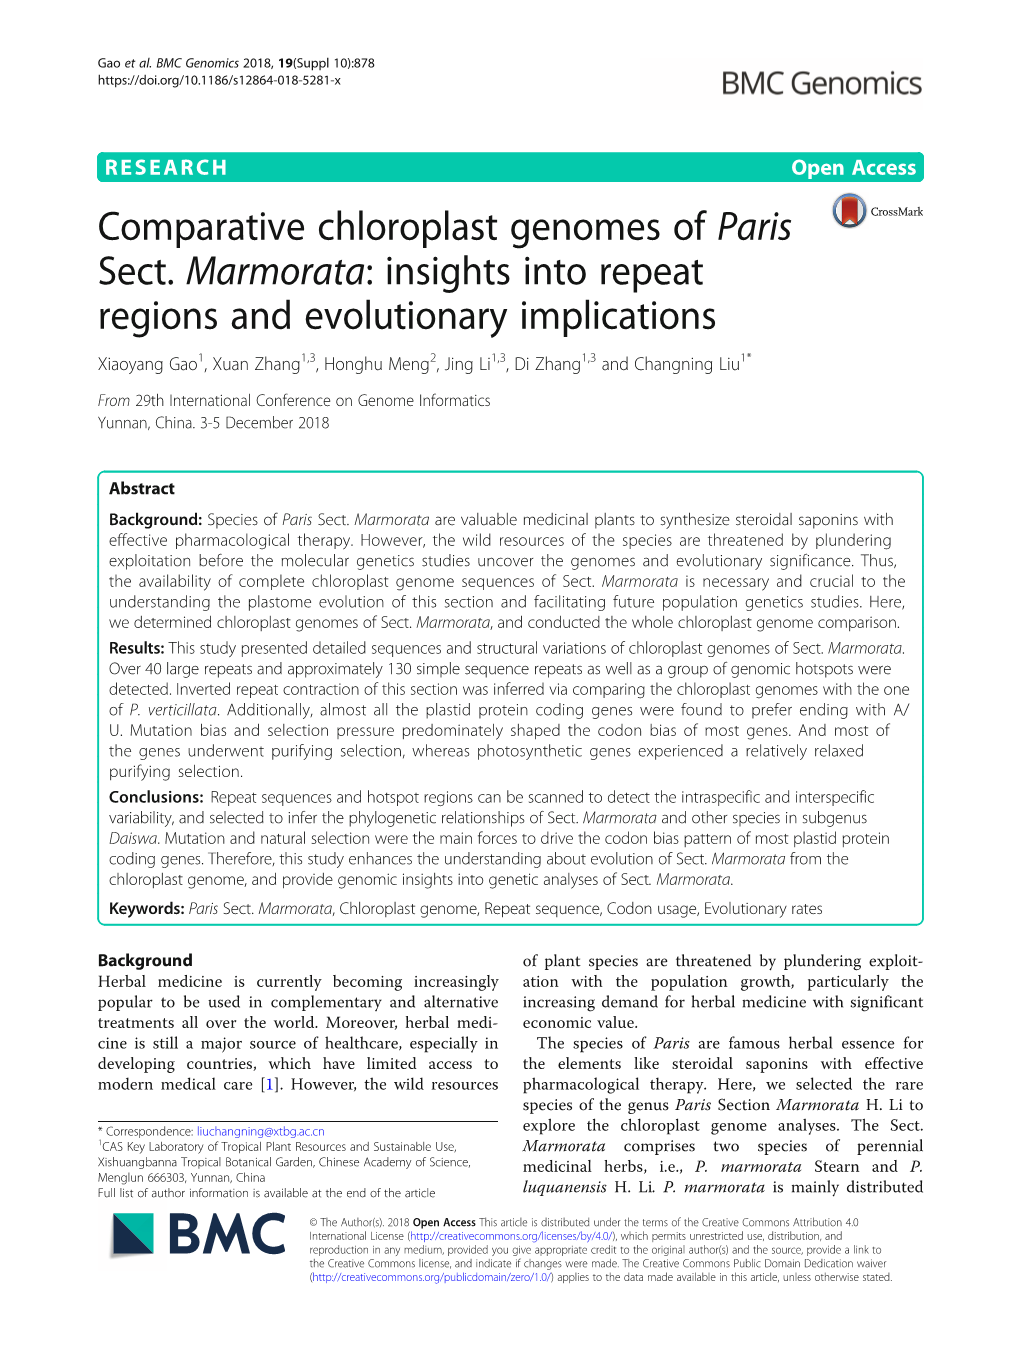 Comparative Chloroplast Genomes of Paris Sect